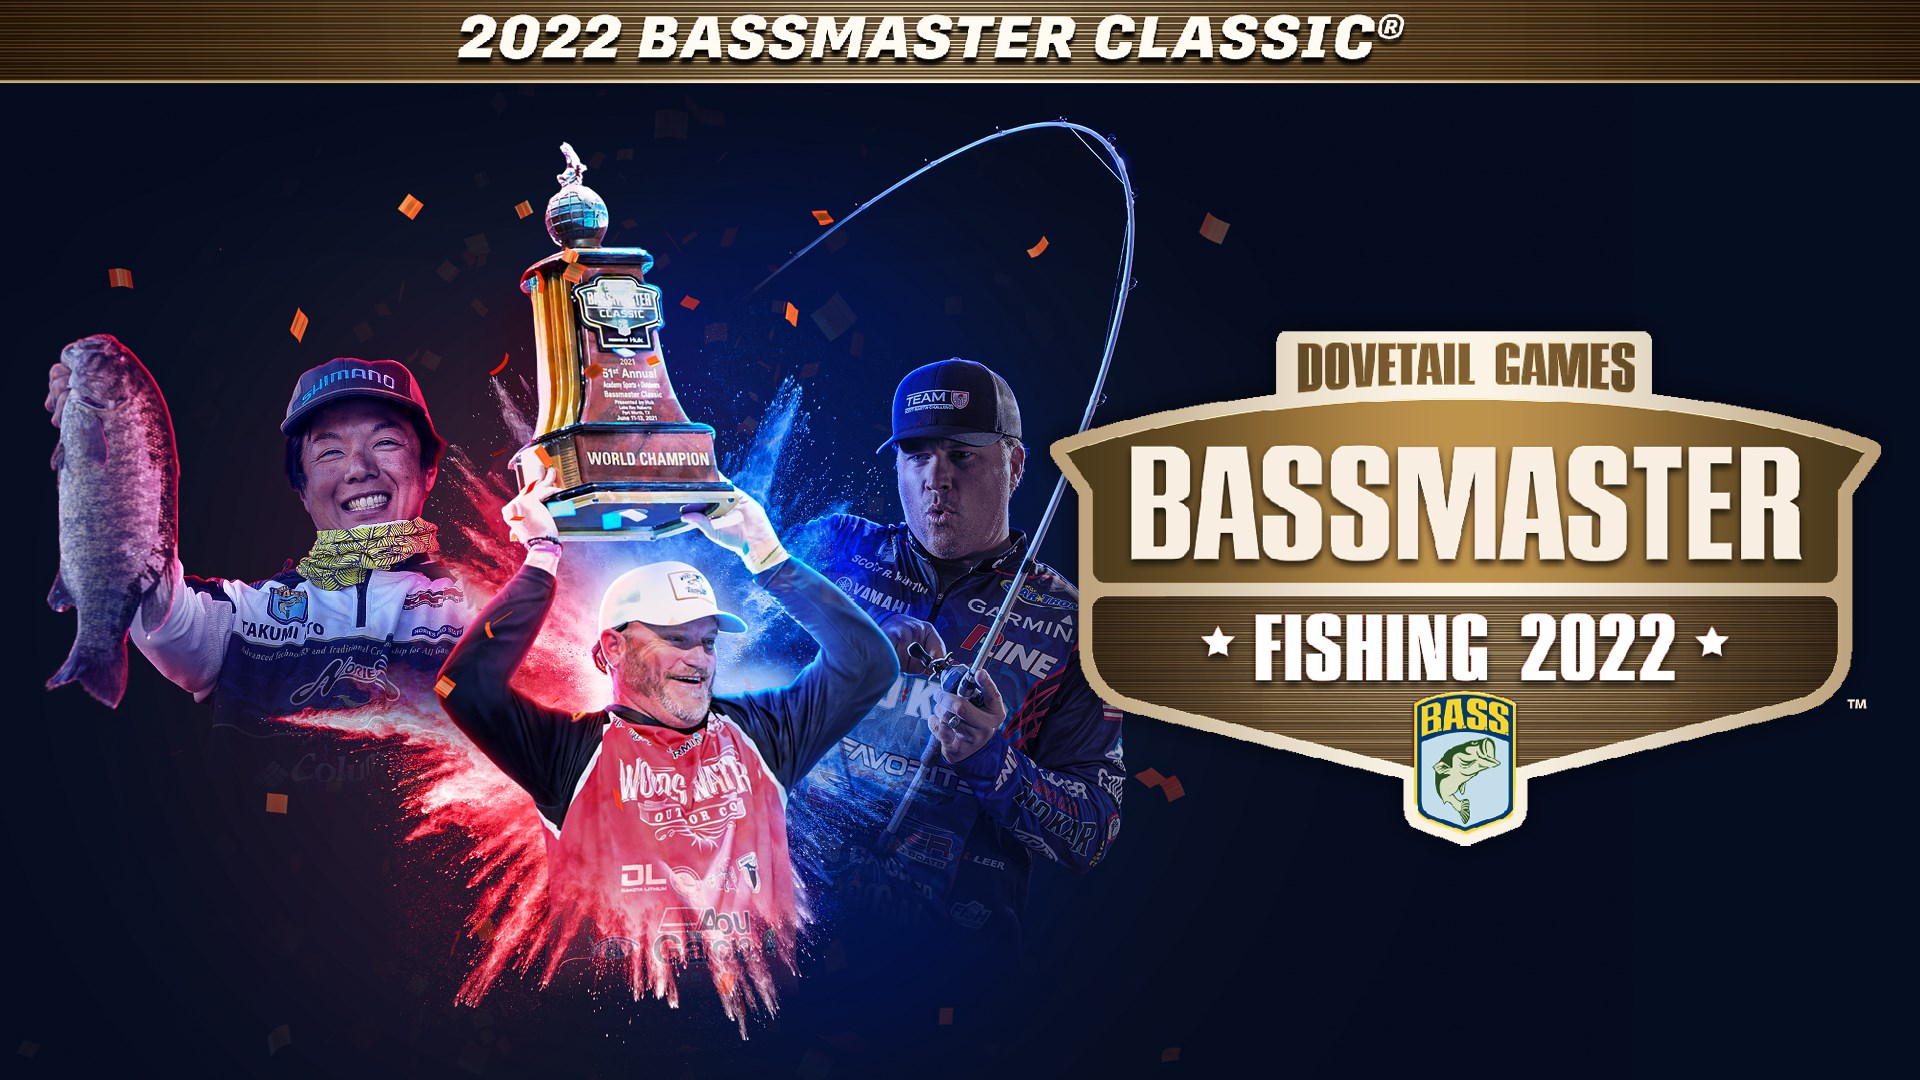 Bassmaster Fishing 2022: 2022 Bassmaster Classic Is Now Available